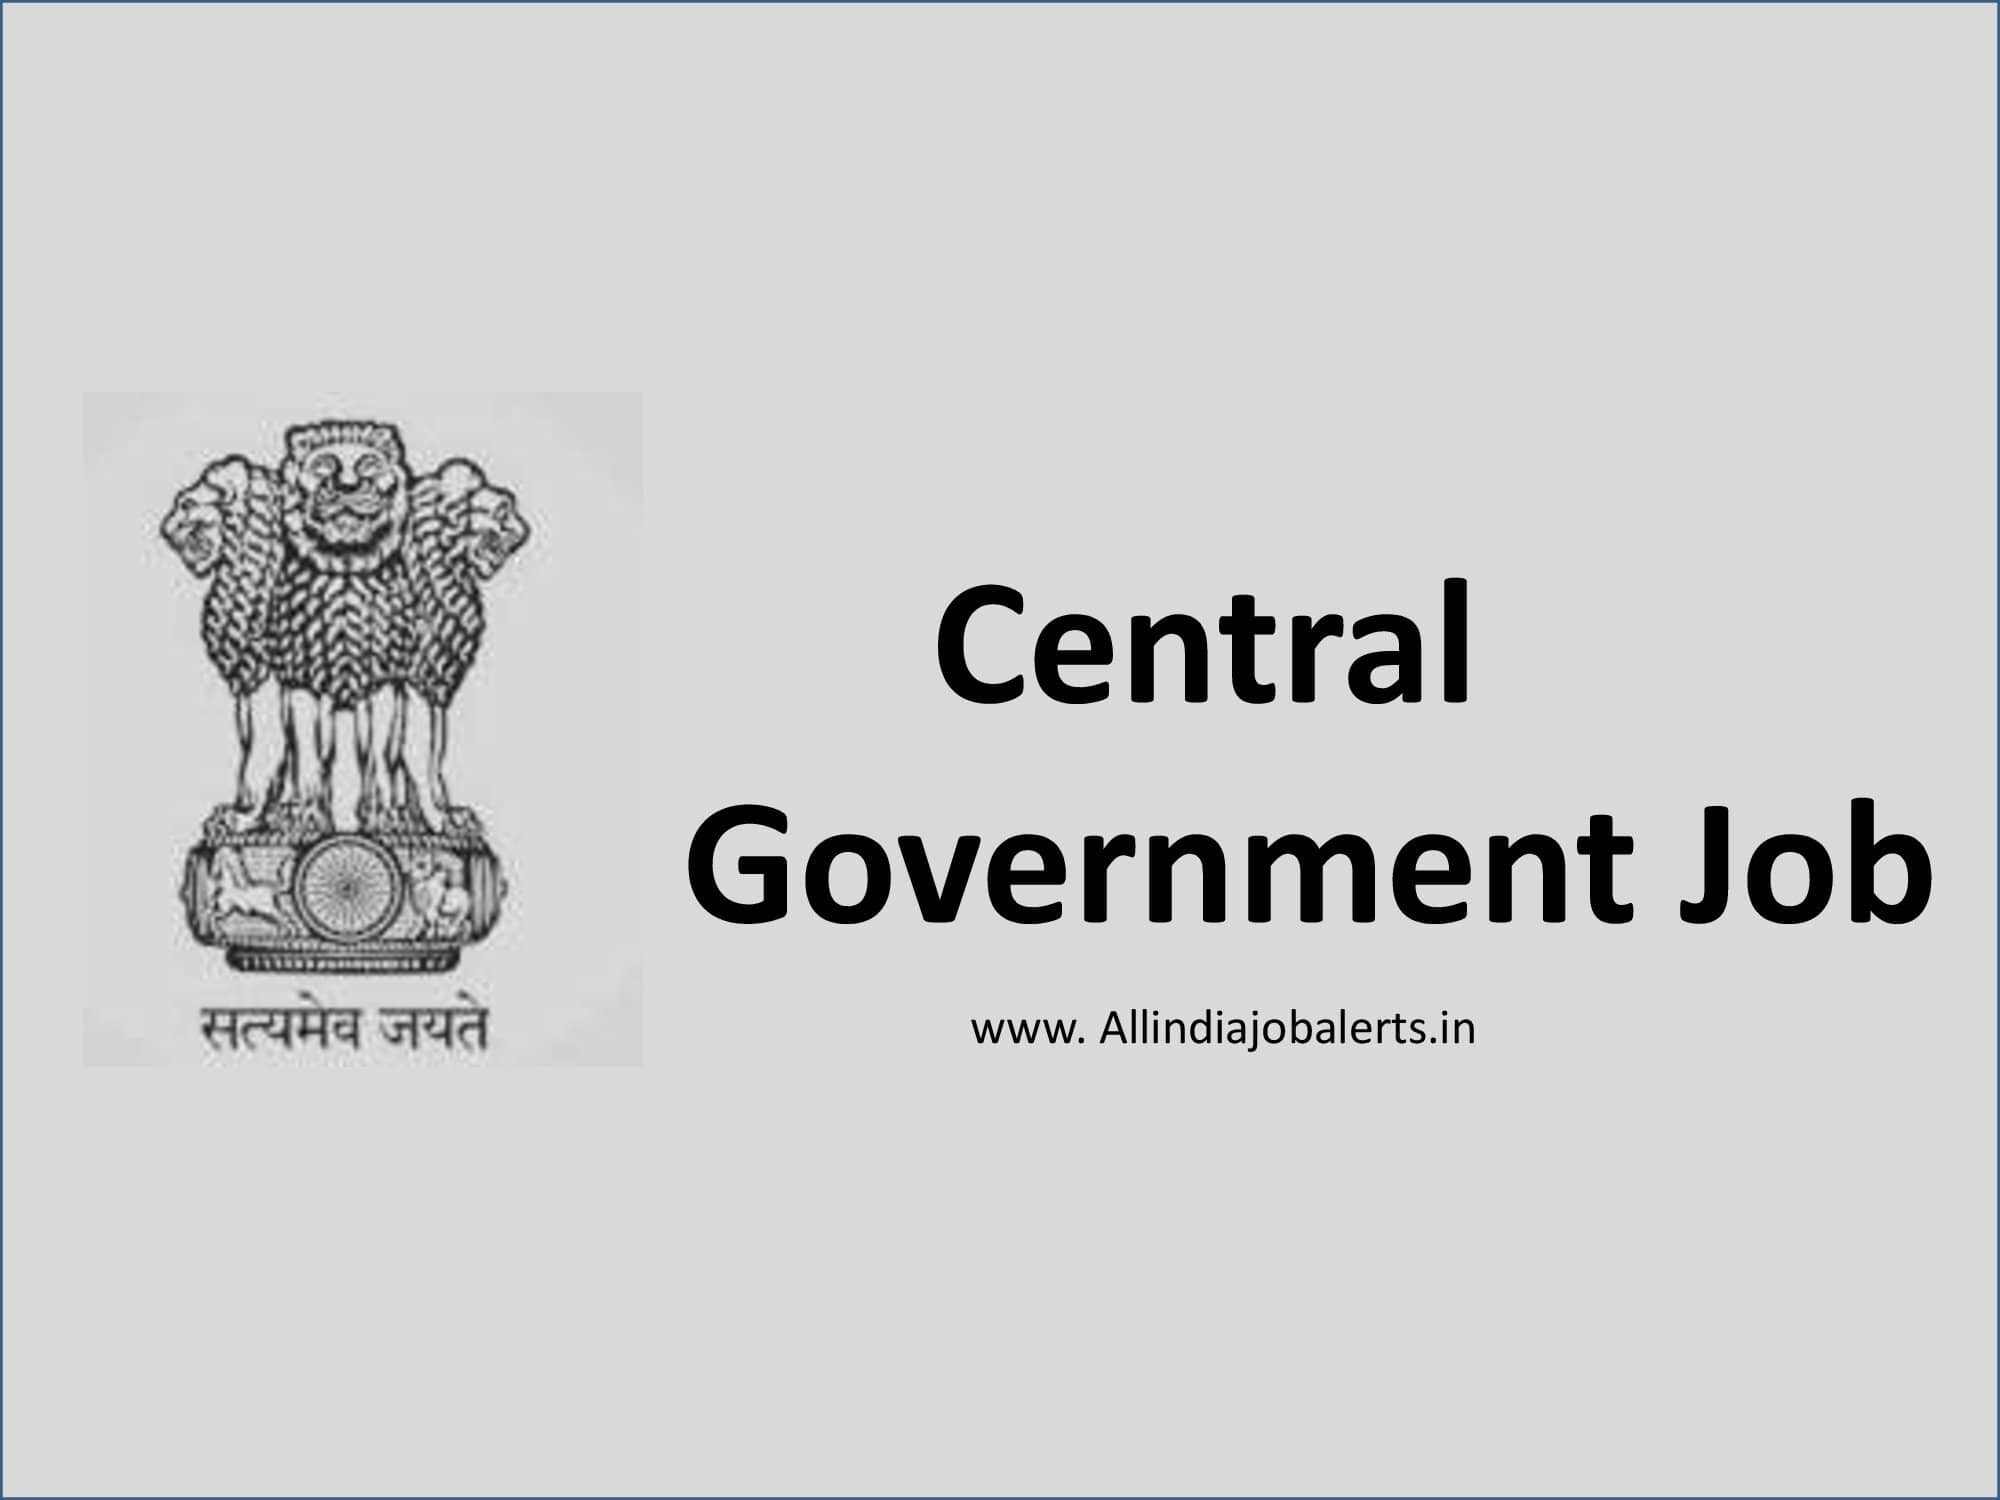 Central Government Job